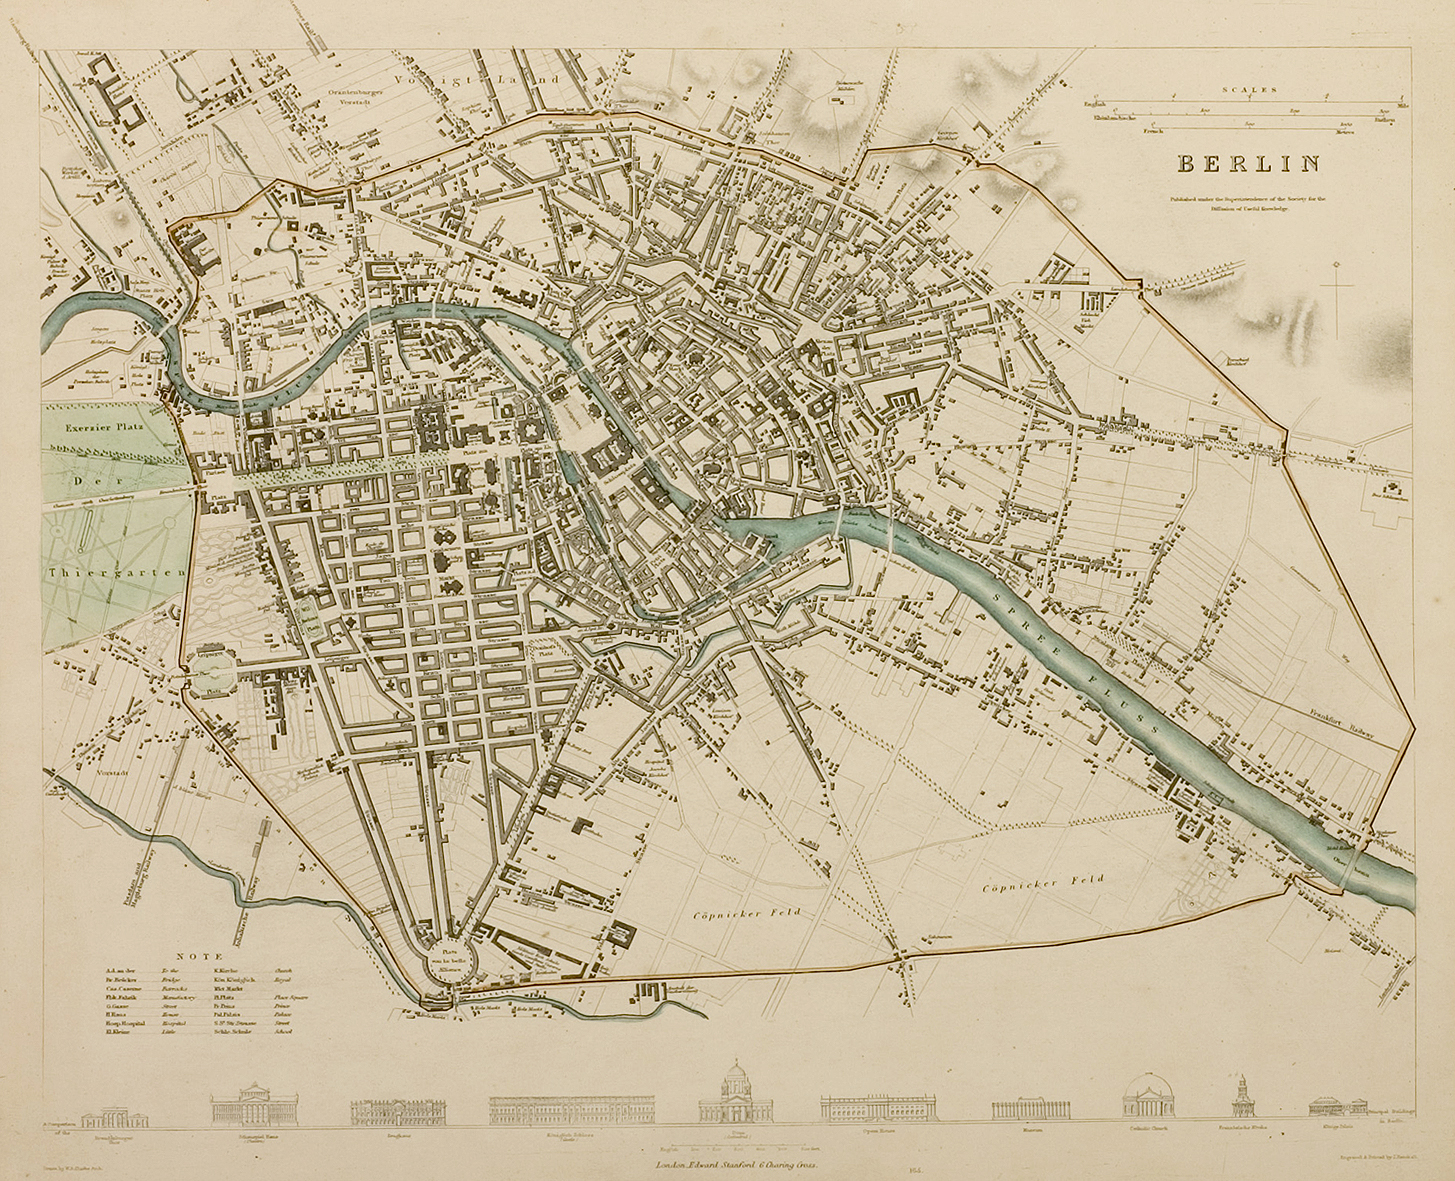 Berlin - Antique Map from 1850